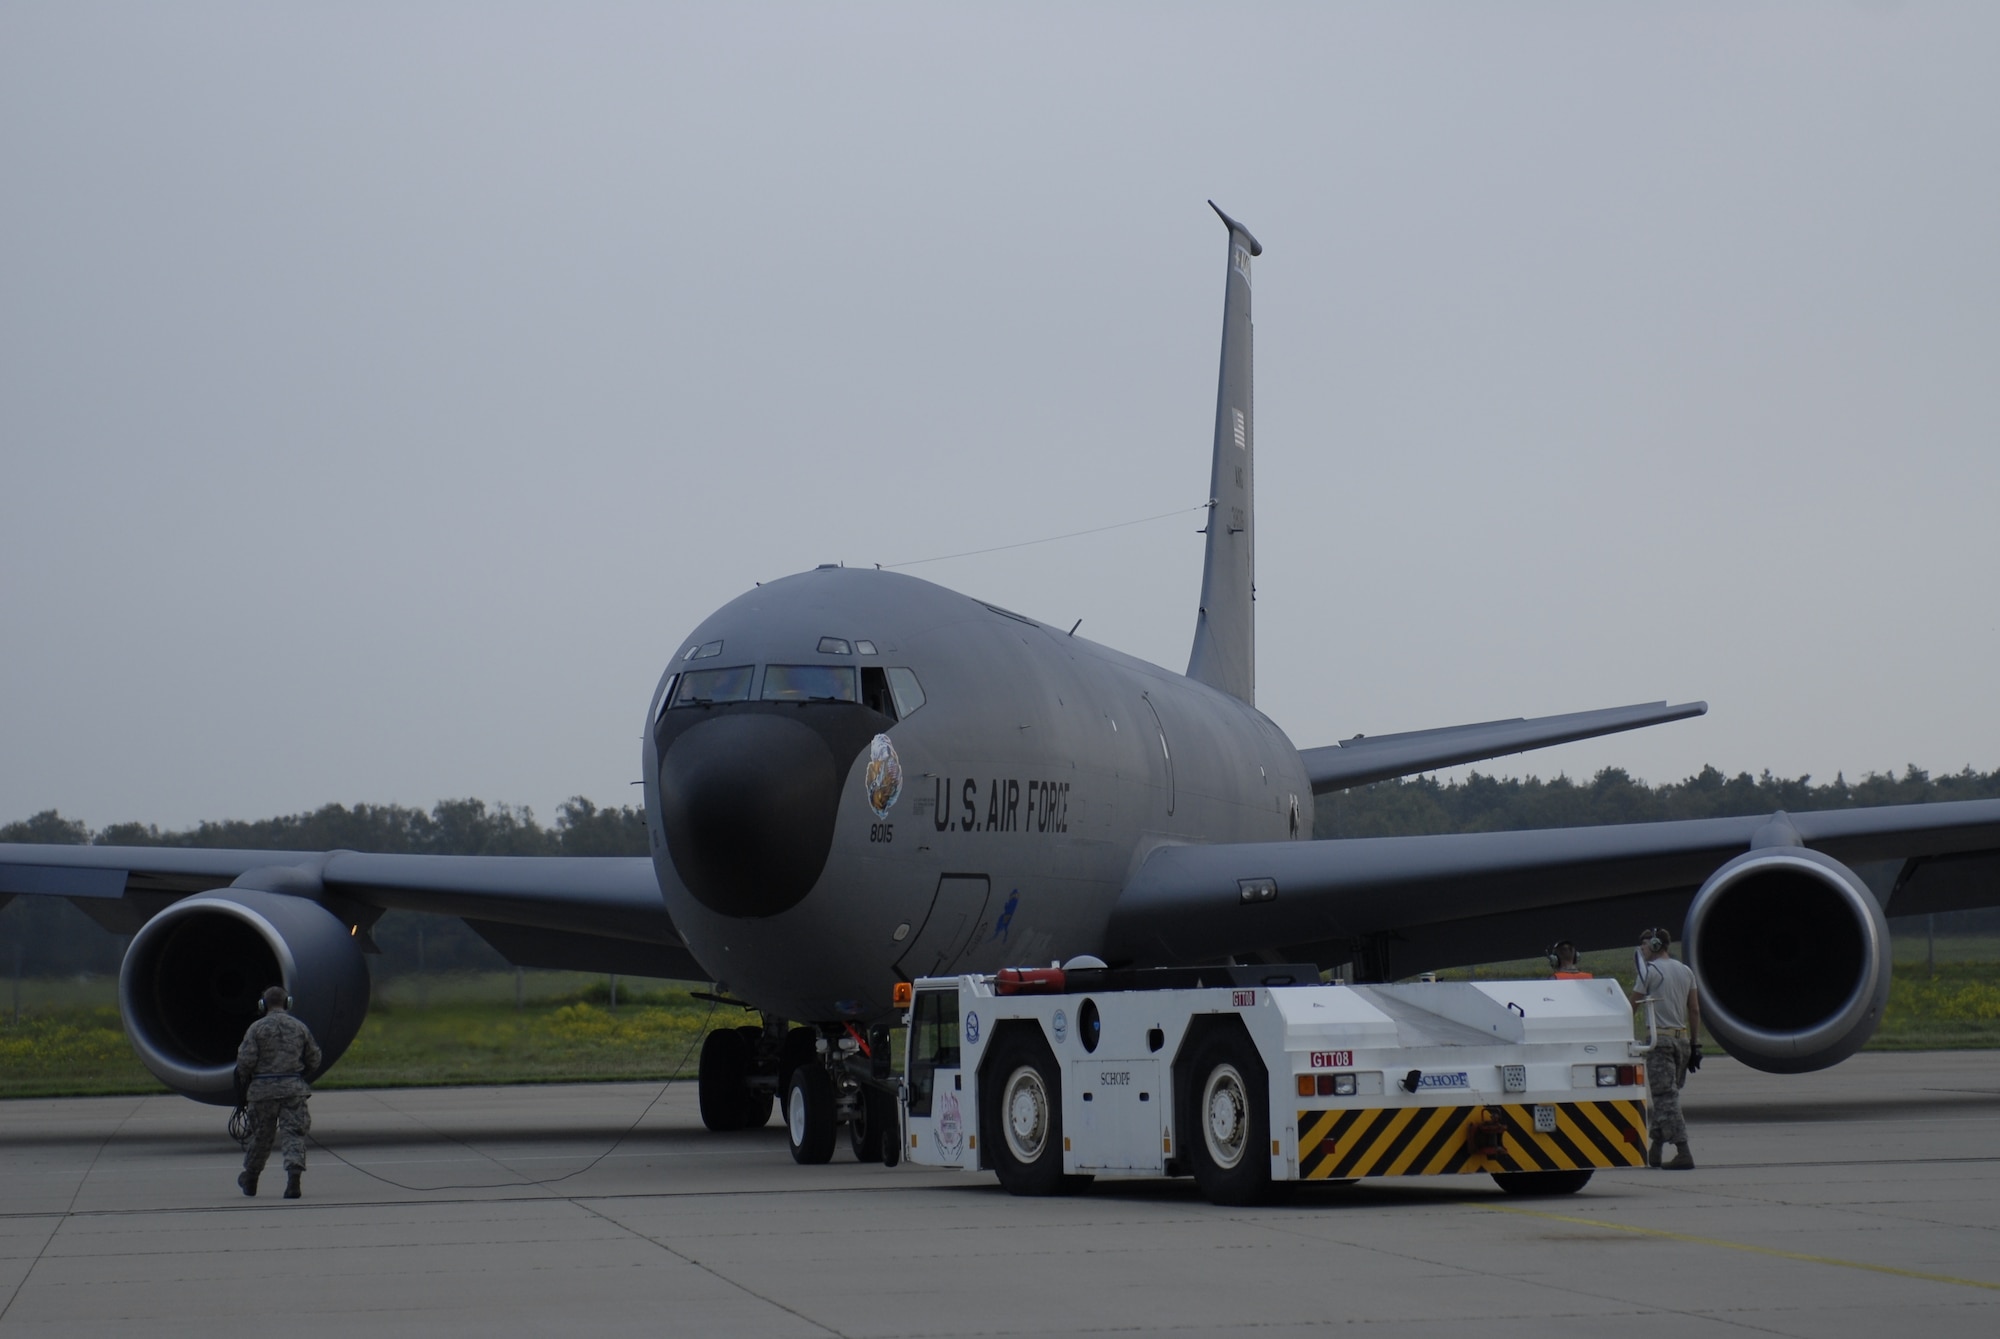 A 168th Air Refueling Wing KC-135 Stratotanker is pushed backward by a tow truck prior to takeoff Sept. 30, 2014, at Geilenkirchen NATO Air Base, Germany. The aircraft carries 125,000 lbs. of fuel and will offload 30,000 to 35,000 lbs. to receiving Boeing E-3A AWACS. (U.S. Air National Guard photo/Senior Airman Francine St. Laurent)